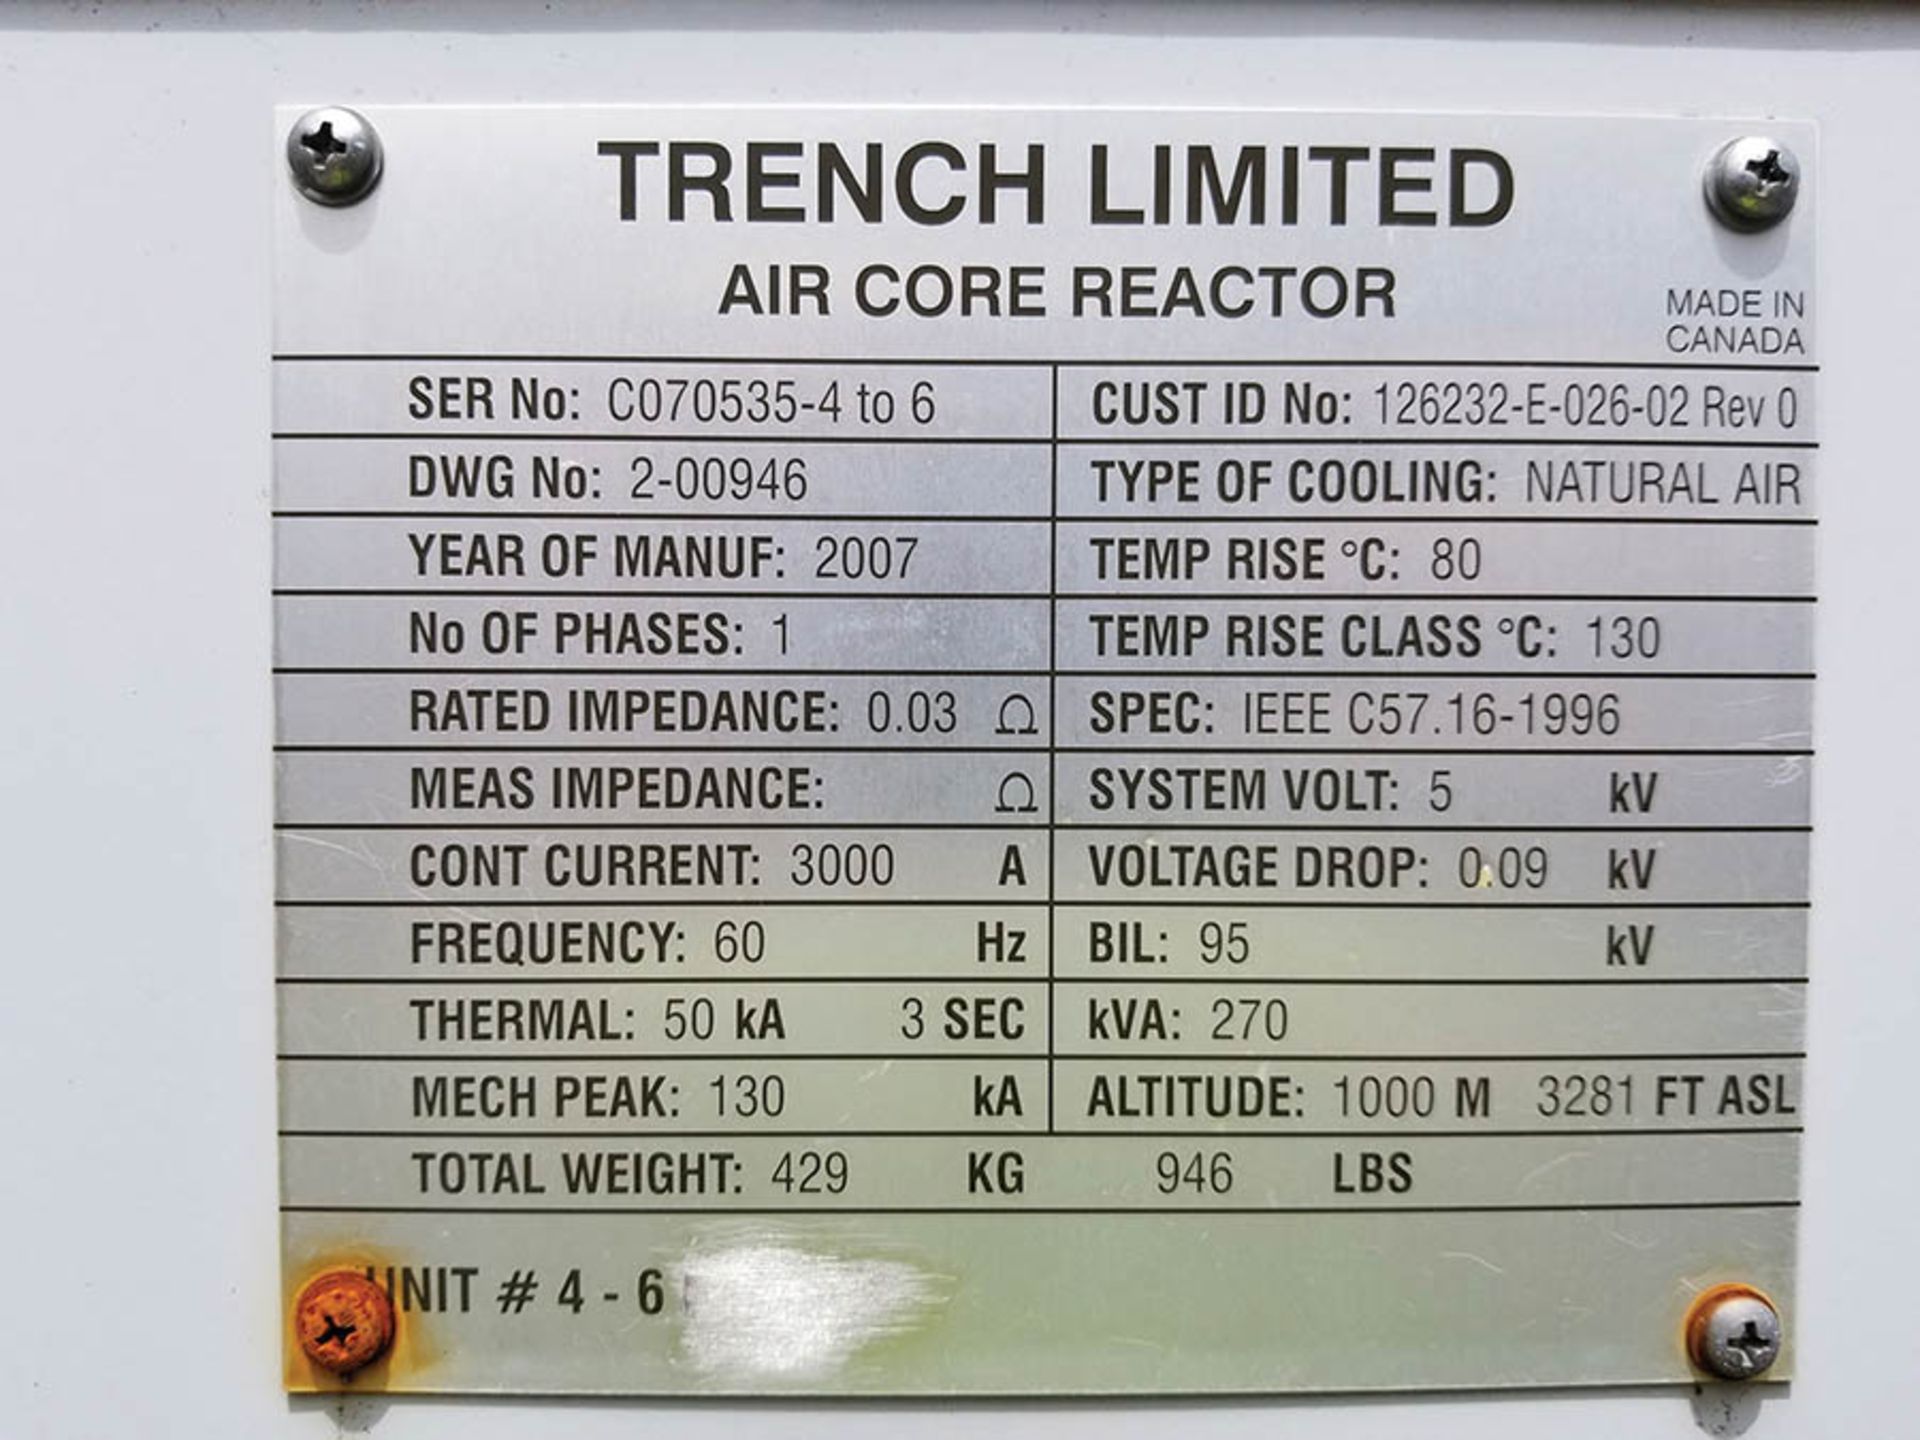 2007 TRENCH LIMITED 3000A AIR CORE REACTOR, SINGLE PHASE, 60HZ, THERMAL 50KA-3 SEC - Image 4 of 5